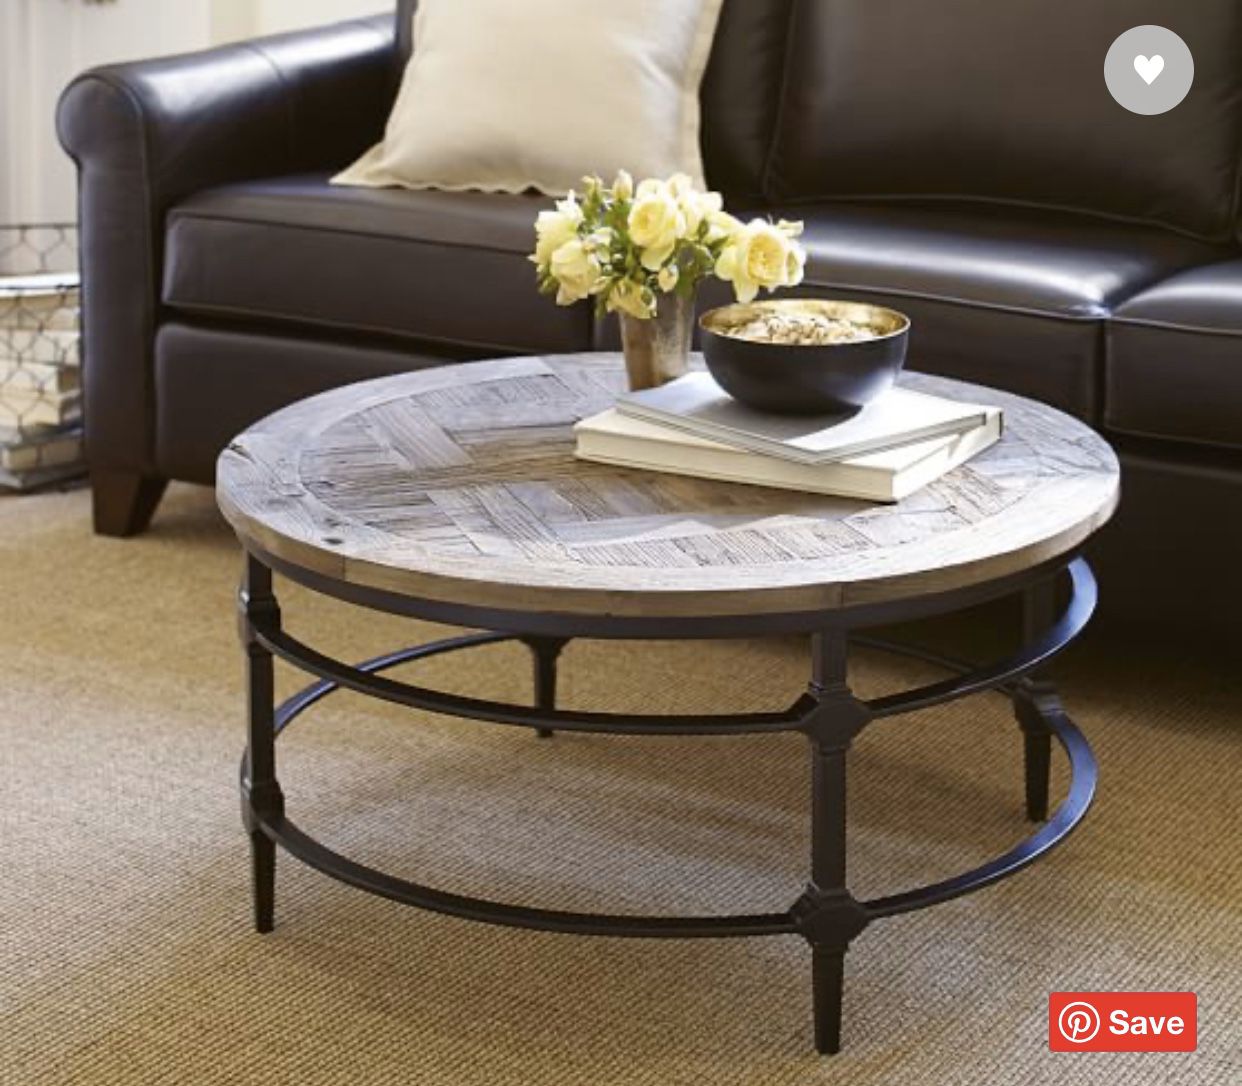 Parquet Reclaimed Wood Round Coffee Table, Pottery Barn